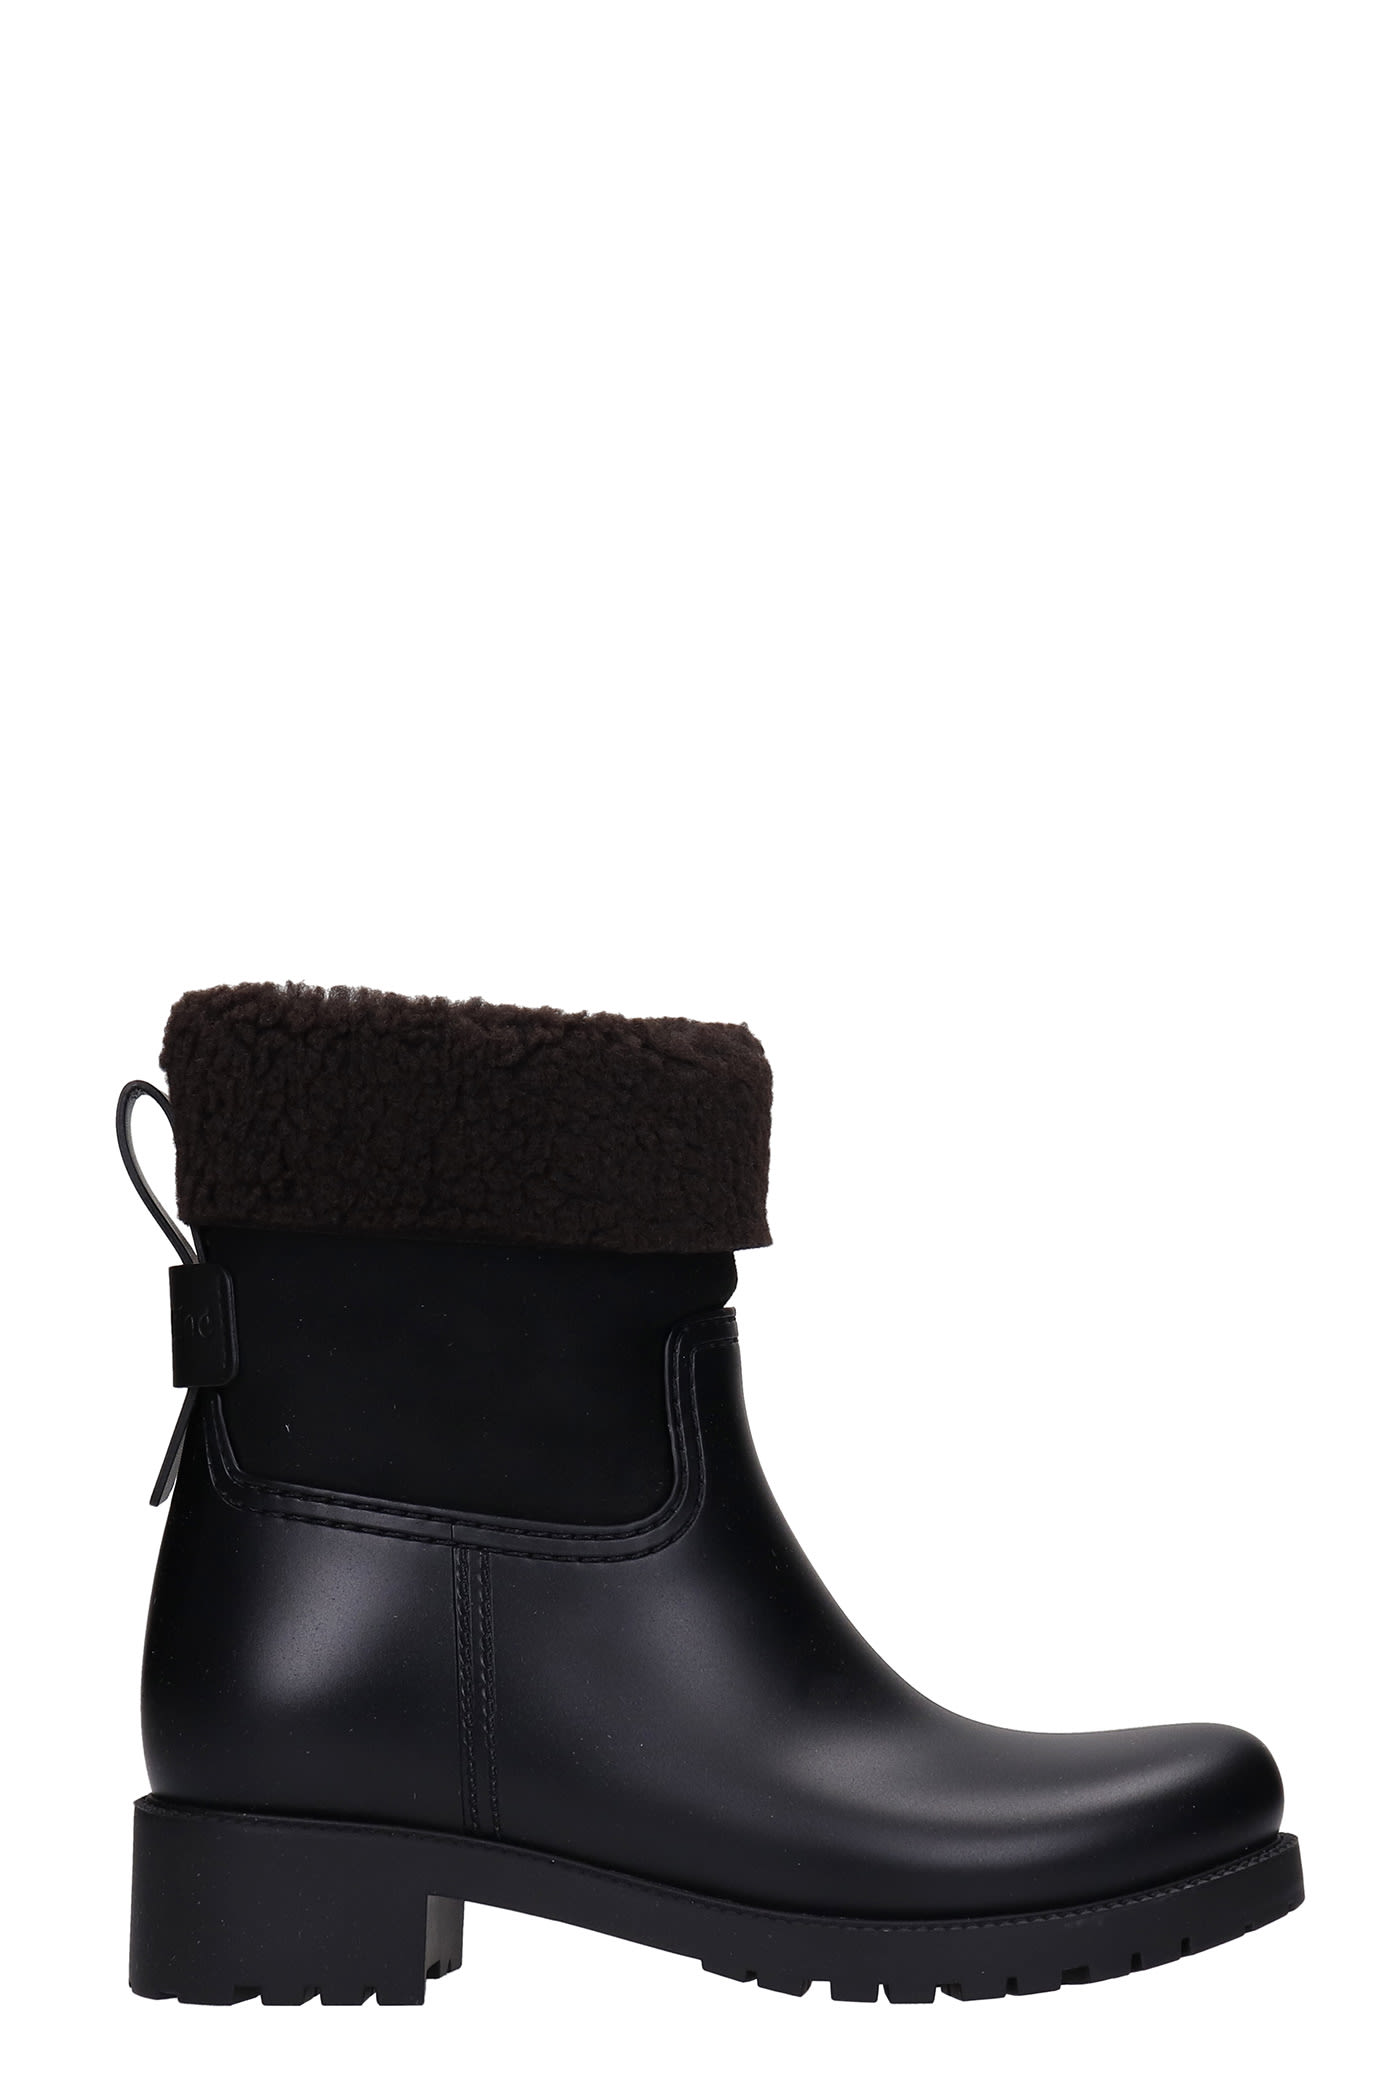 See by Chloé Jannet Low Heels Ankle Boots In Black Eco-fur